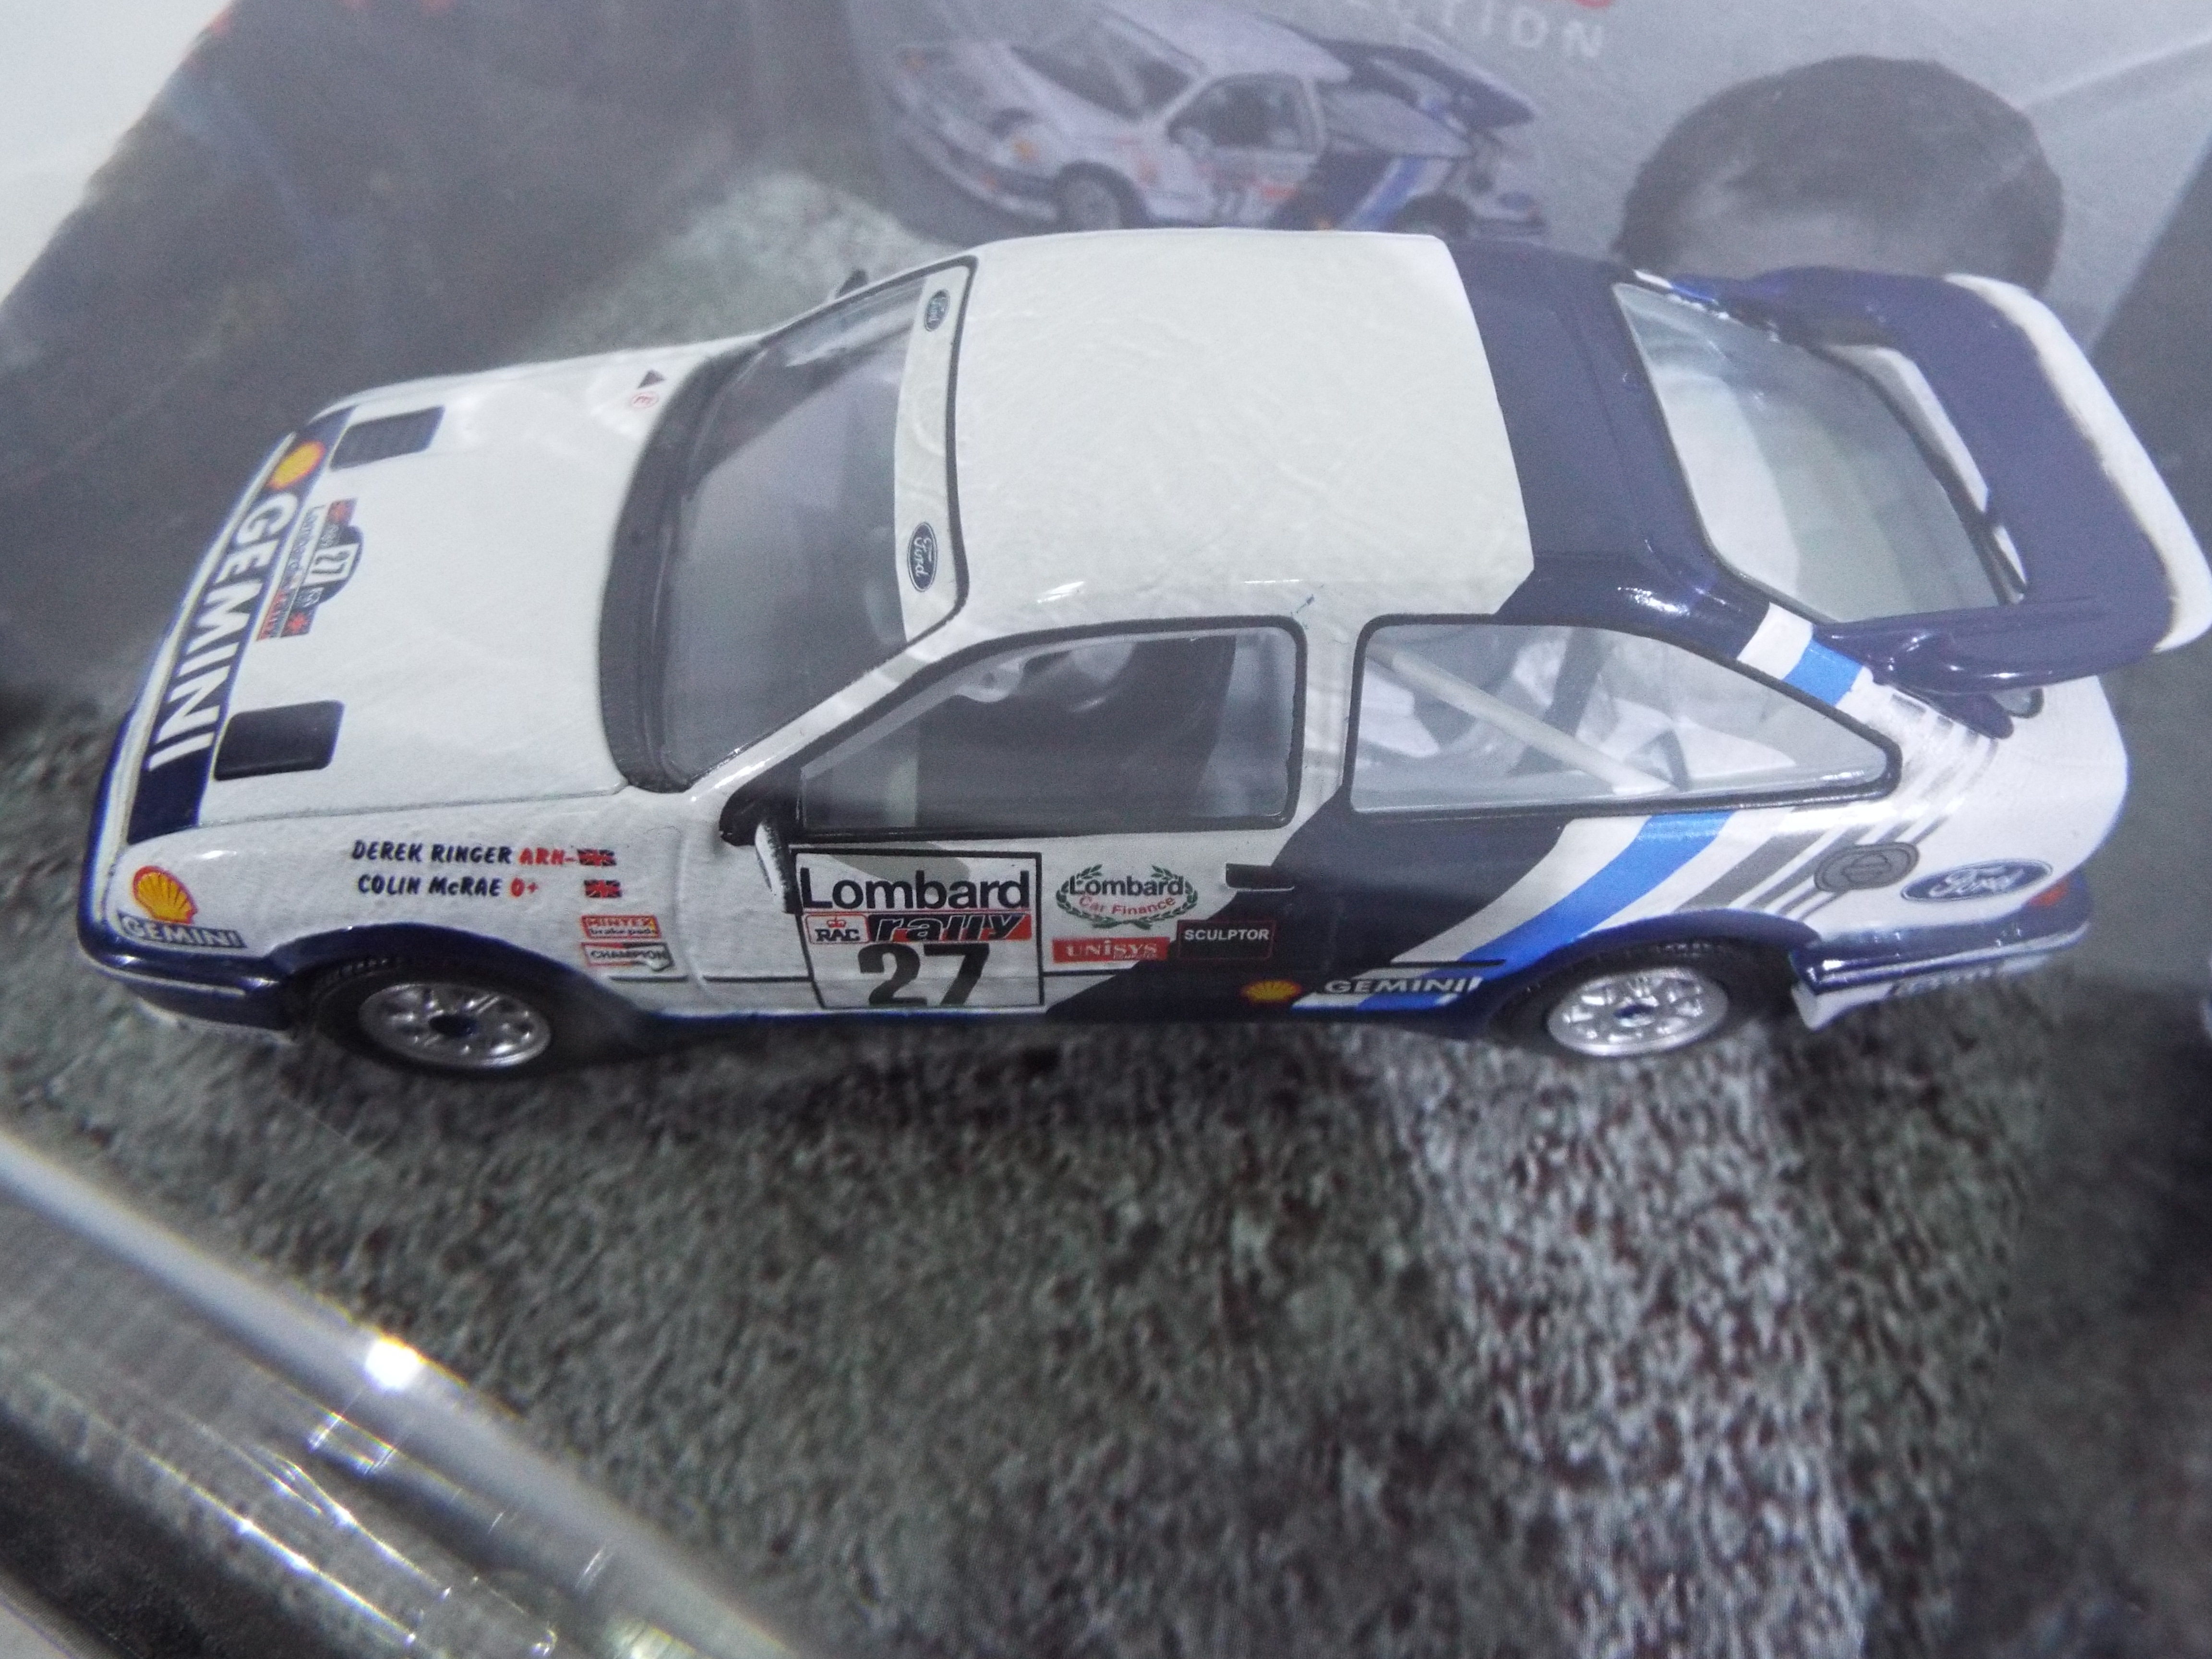 Corgi - Colin McRae Motorsport - A boxed special edition Colin McRae Ford Sierra Cosworth Group A # - Image 2 of 3